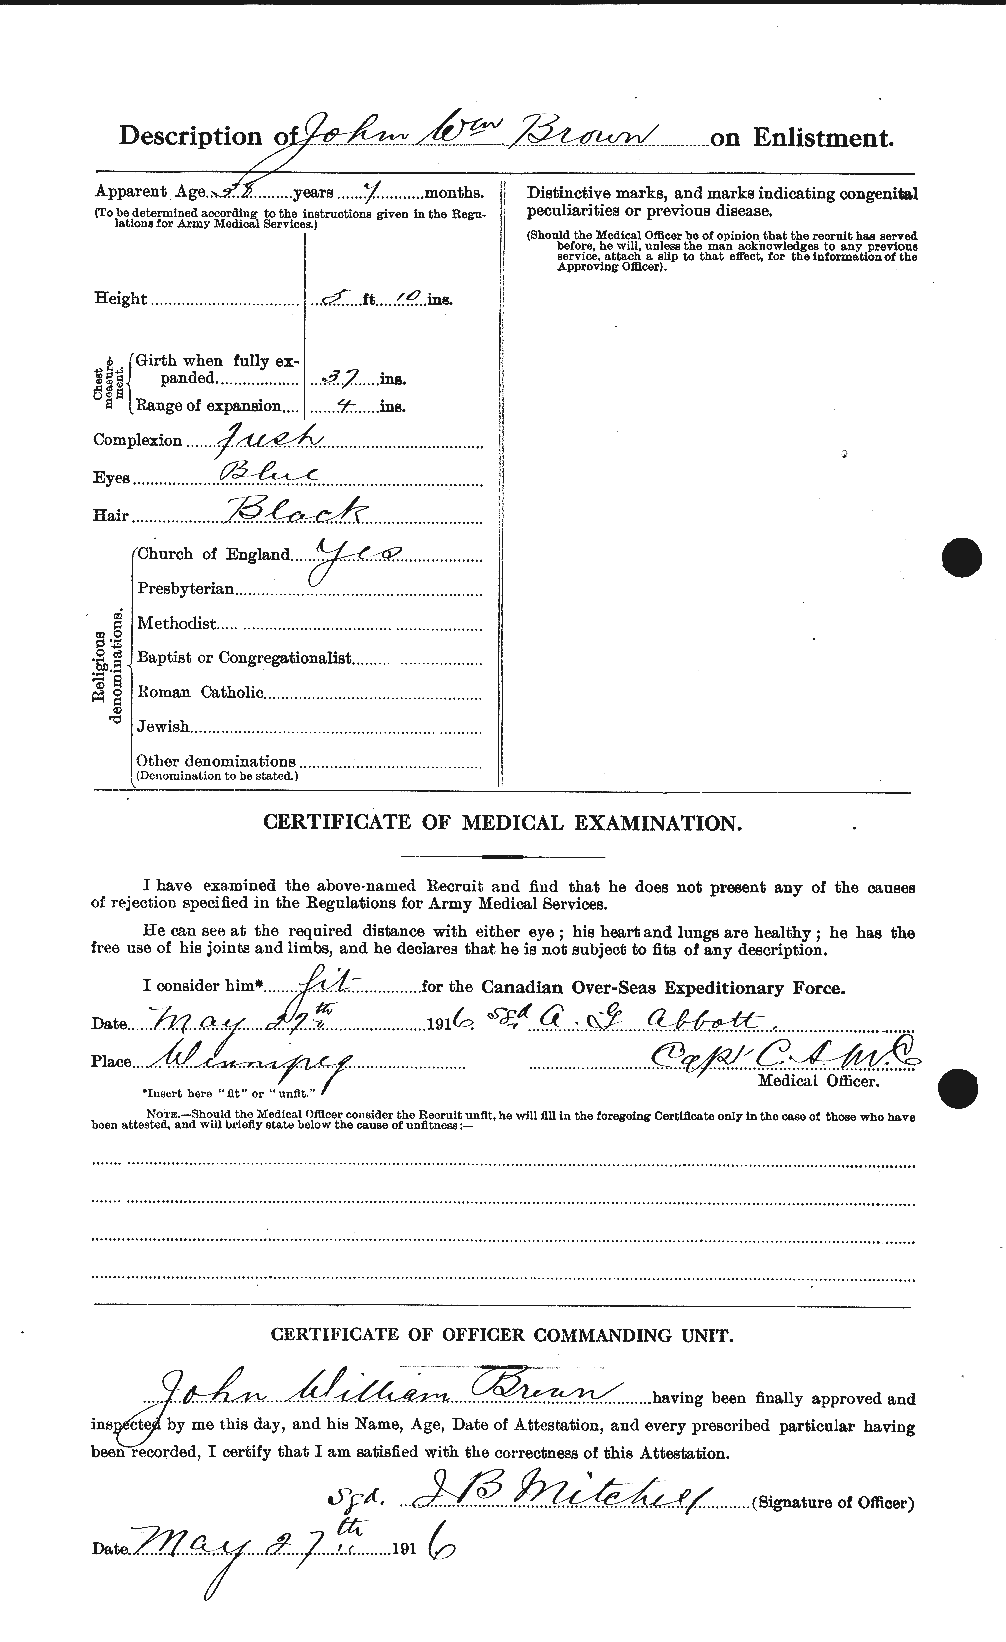 Personnel Records of the First World War - CEF 265900b